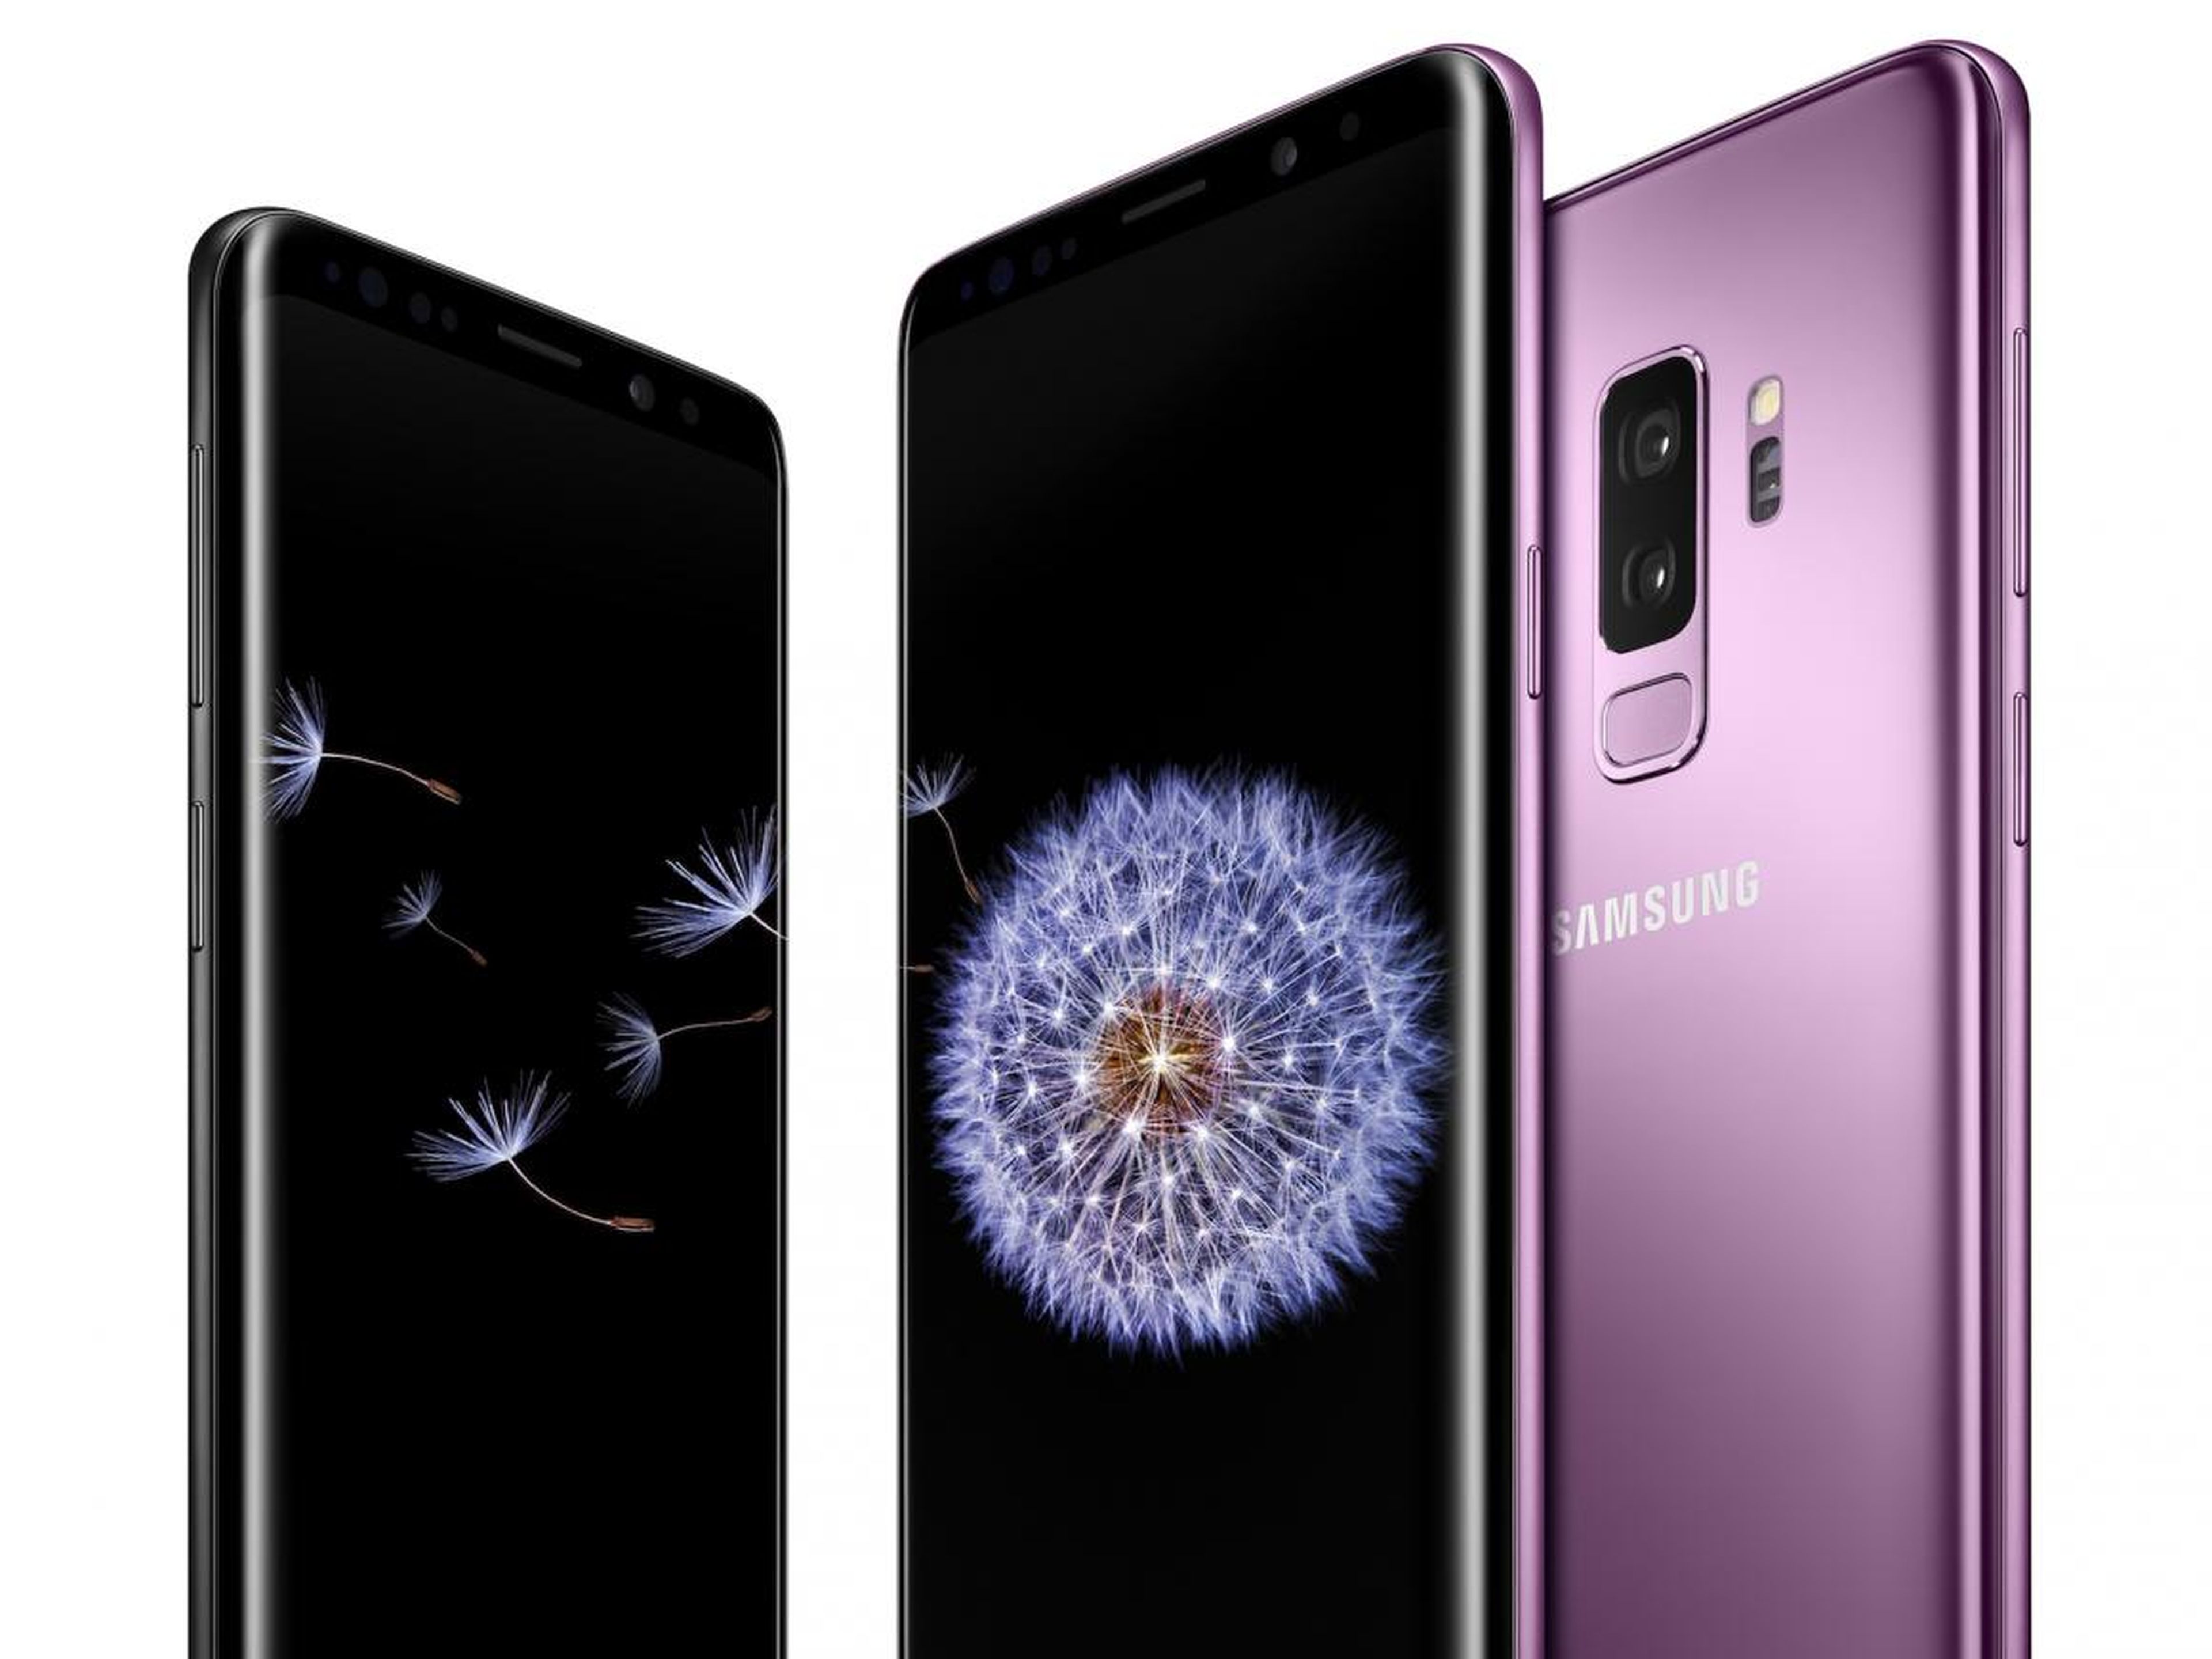 There will be three models of the Galaxy S10.